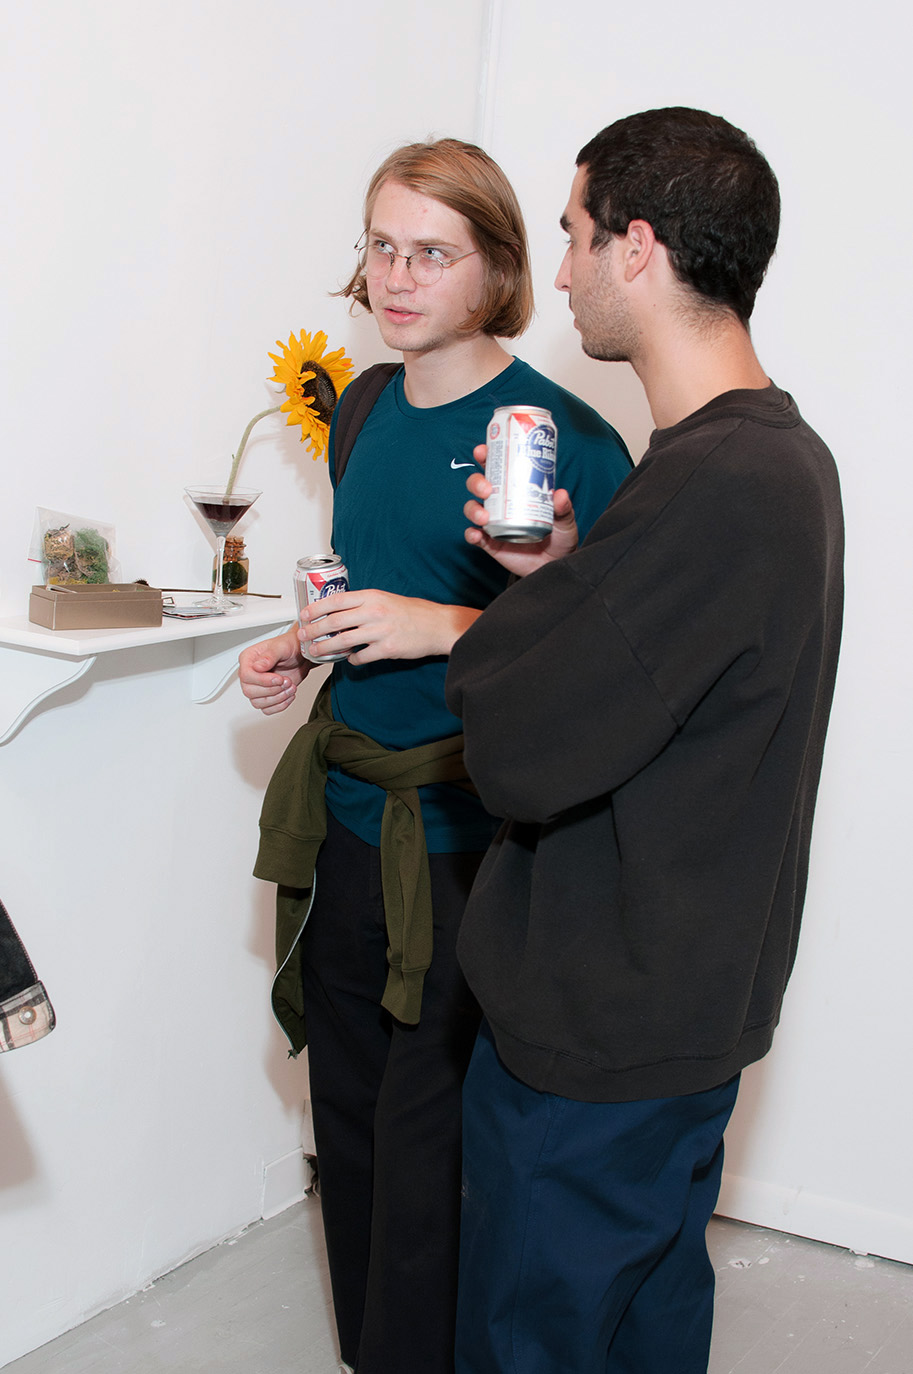 Two young men holding beers and talking next to a shelf with small sculptures